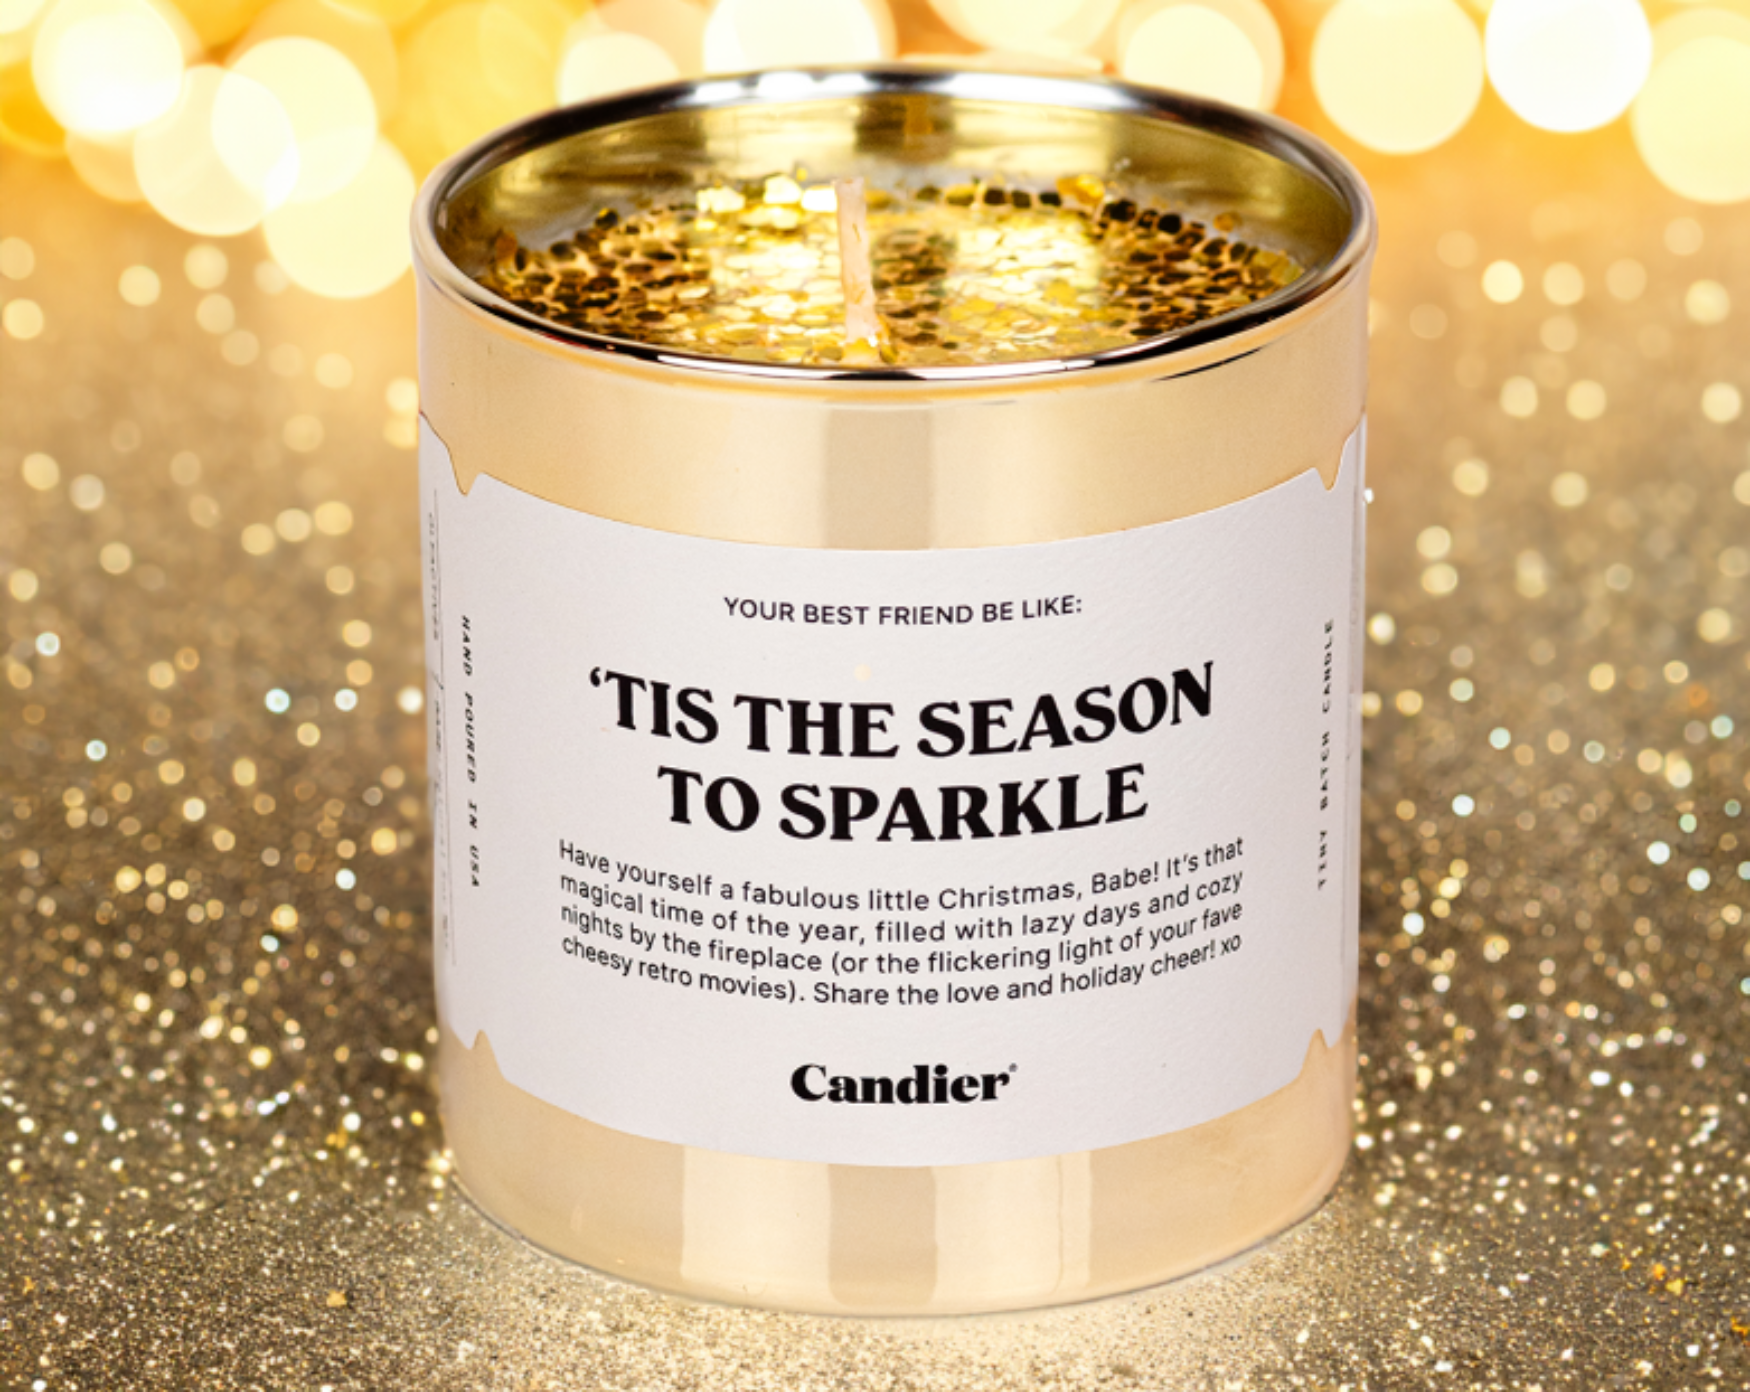 A Christmas themed Candier candle in a metallic gold glass vessel, topped with and surrounded by sparkling gold glitter and a label that reads "Tis The Season To Sparkle"